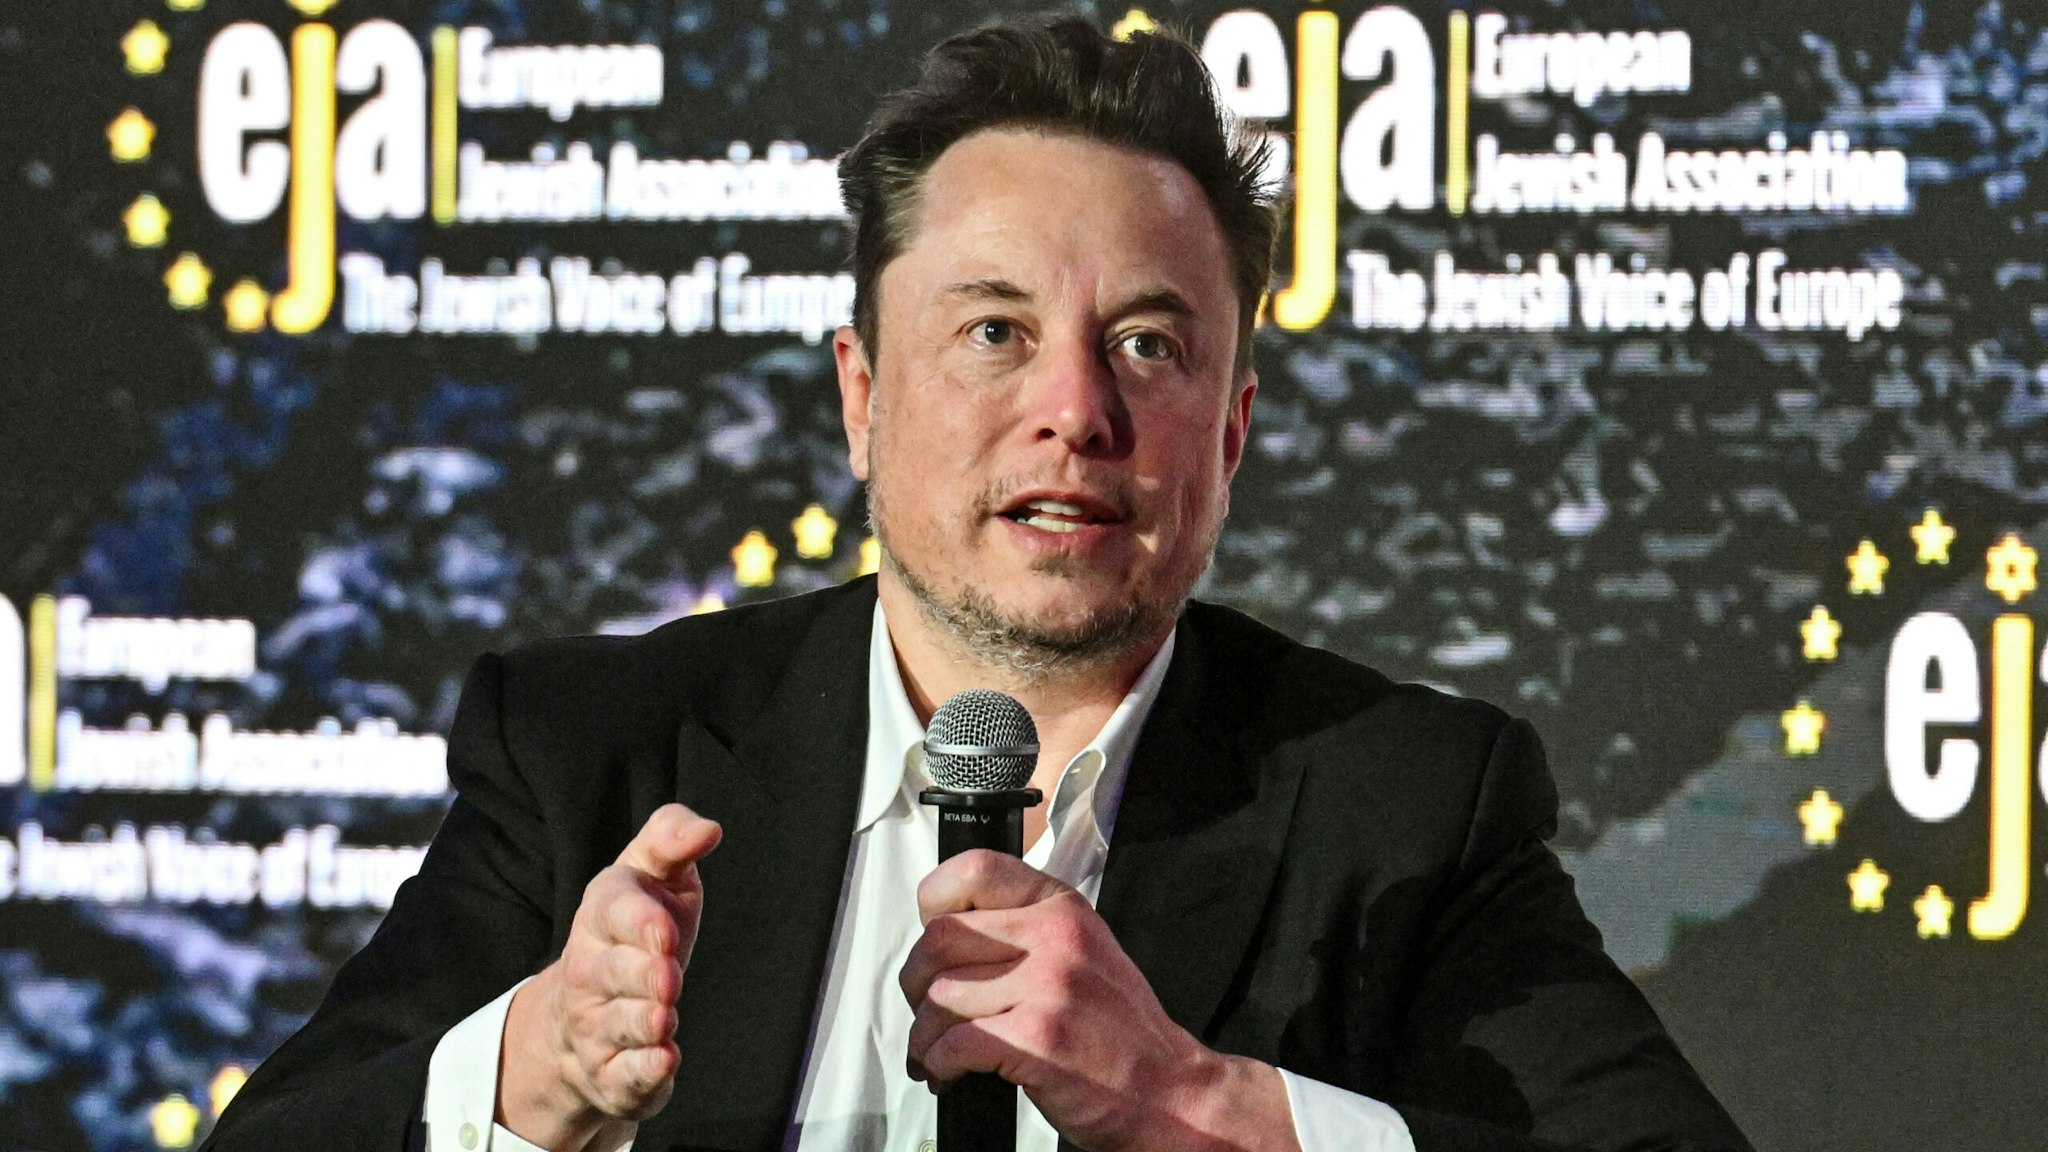 KRAKOW, POLAND - JANUARY 22: SpaceX, X (formerly known as Twitter), and Tesla CEO Elon Musk speaks during live interview with Ben Shapiro at the symposium on fighting antisemitism on January 22, 2024 in Krakow, Poland. The symposium on anti-semitism, organized by the European Jewish Association, was held ahead of international Holocaust remembrance day on January 27.